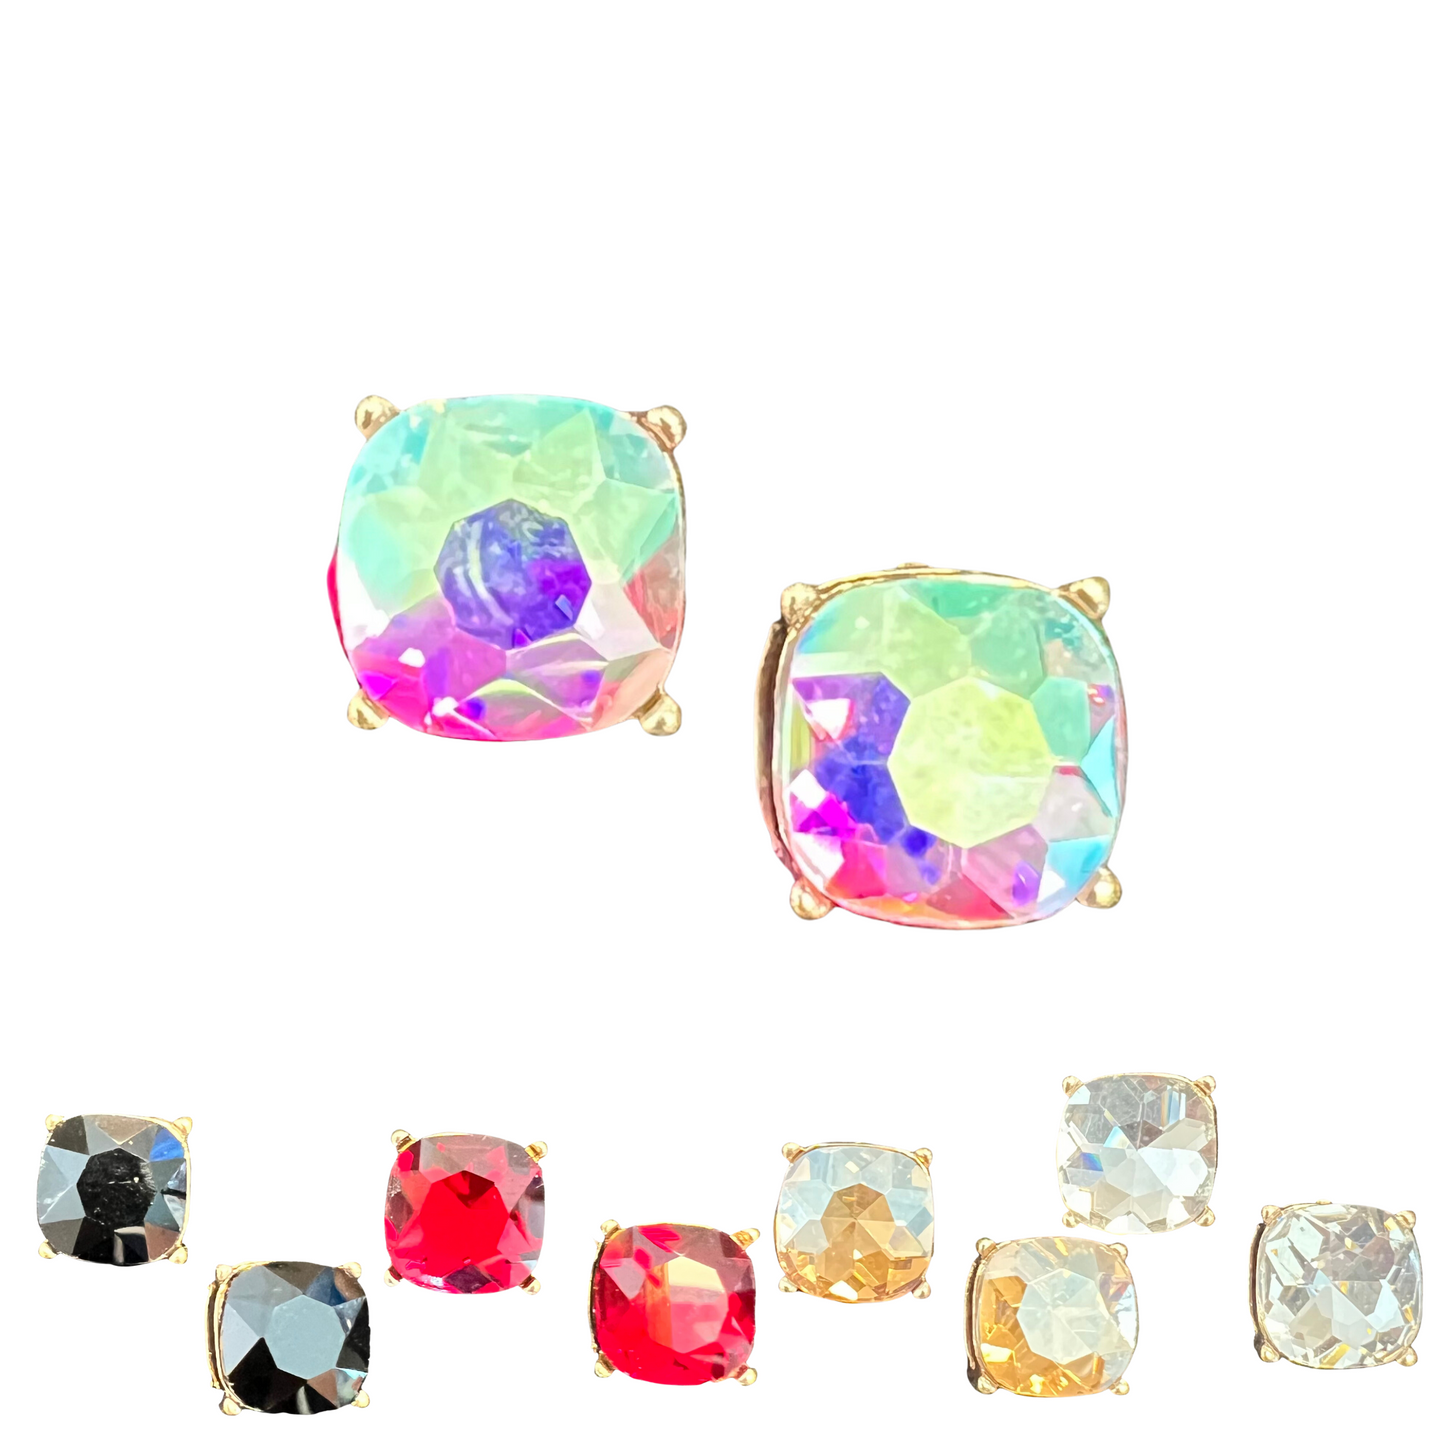 These Large Gemstone Stud Earrings are the perfect statement accessory. Featuring a large stone embedded in a metal stud, these earrings come in a variety of colors to match any outfit. Show off your style with these on-trend earrings.